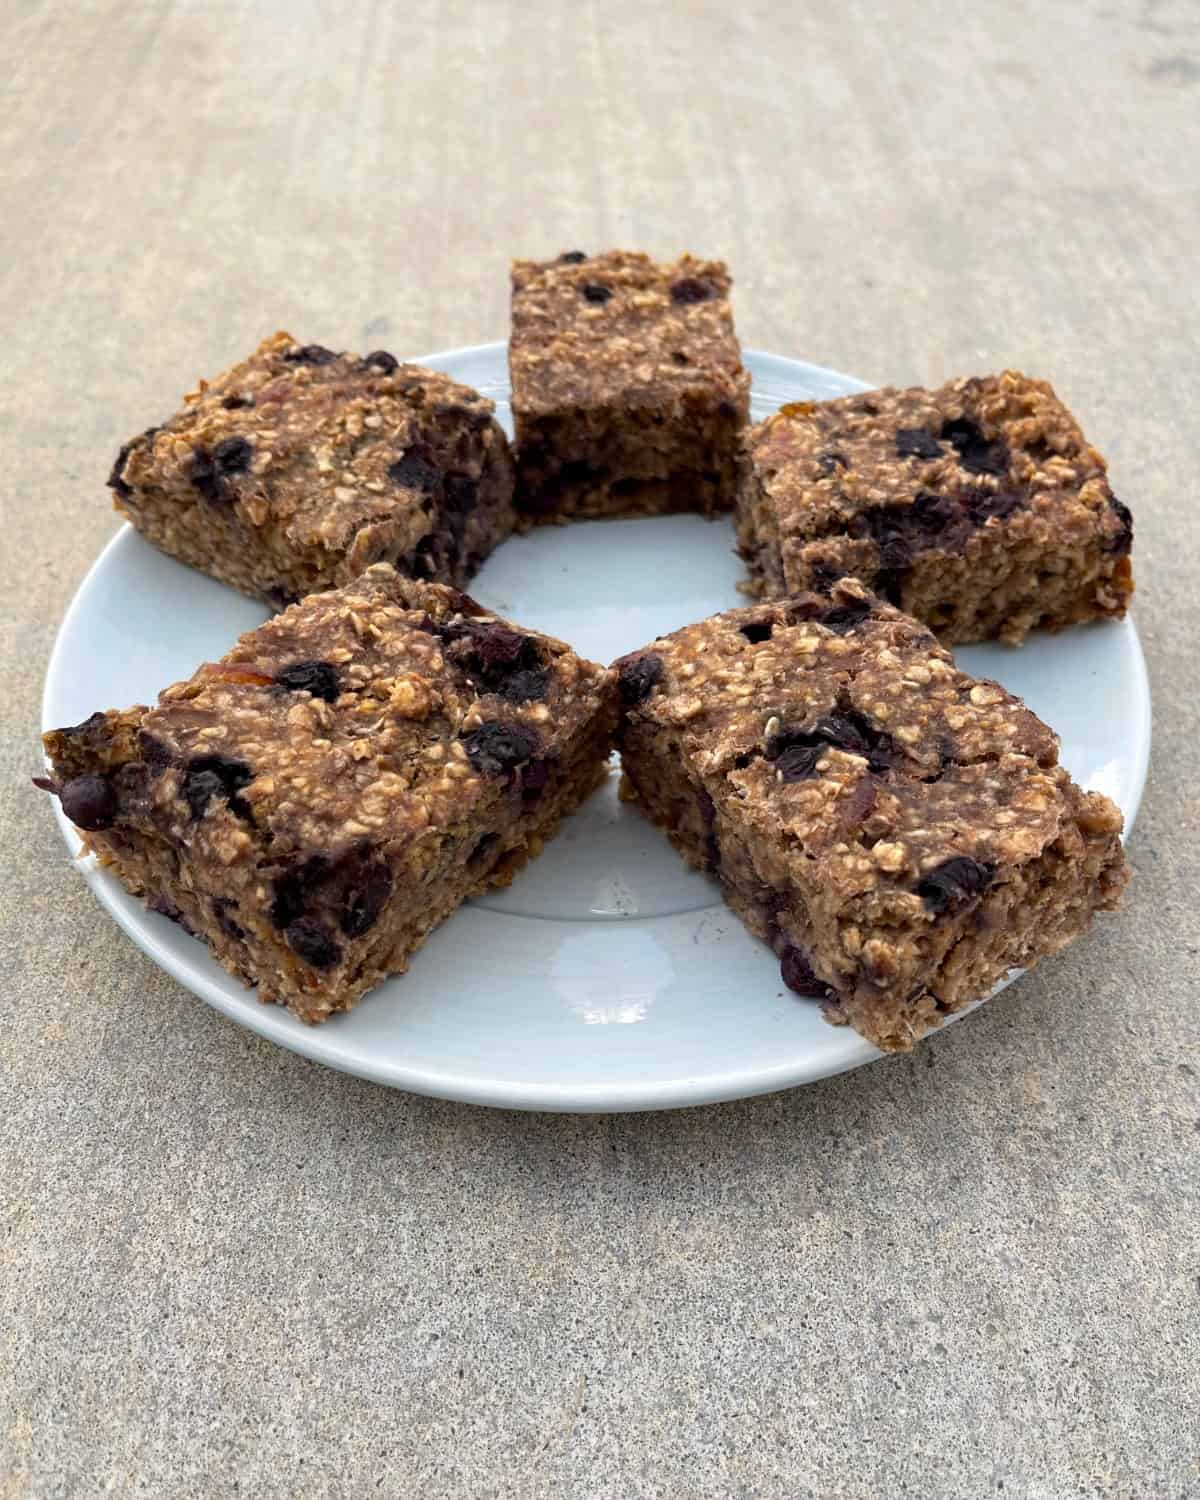 Blueberry banana oat squares on small blue plate.